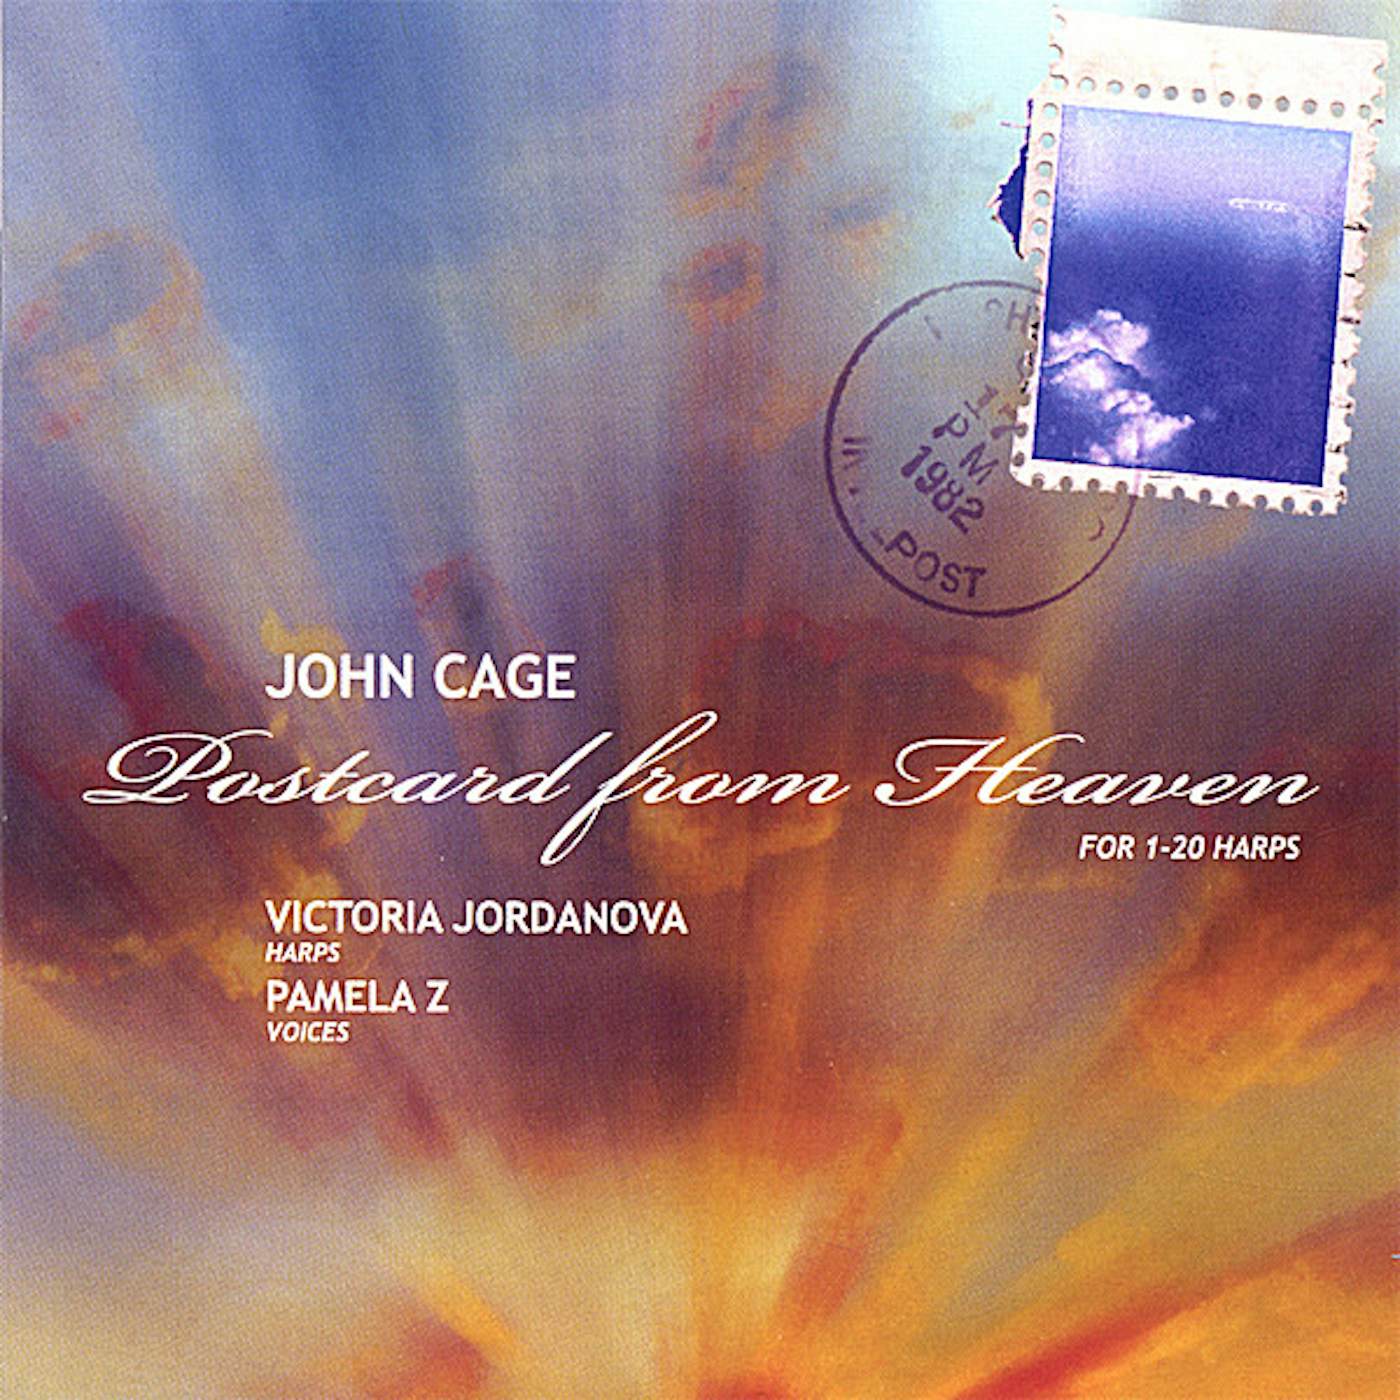 John Cage POSTCARD FROM HEAVEN CD